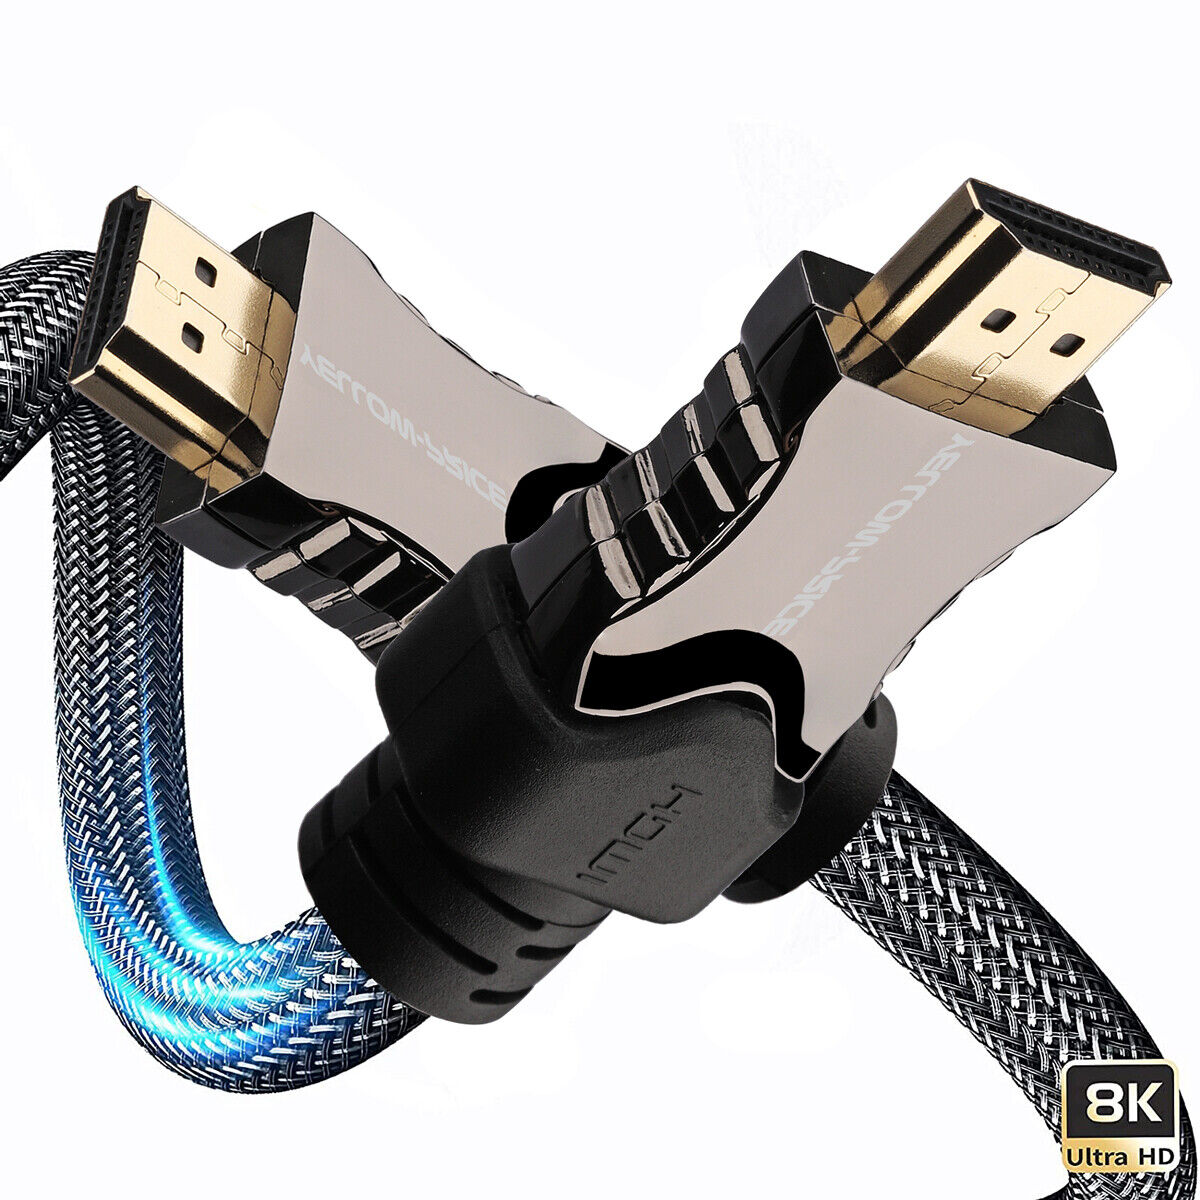  FIBER OPTIC HDMI 8K 2.1 Cable Supports 8K 120Hz 4K@240Hz 3D 4:4:4 /Copper Cable YELLOW-PRICE , Support Dynamic HDR, Dolby Vision,